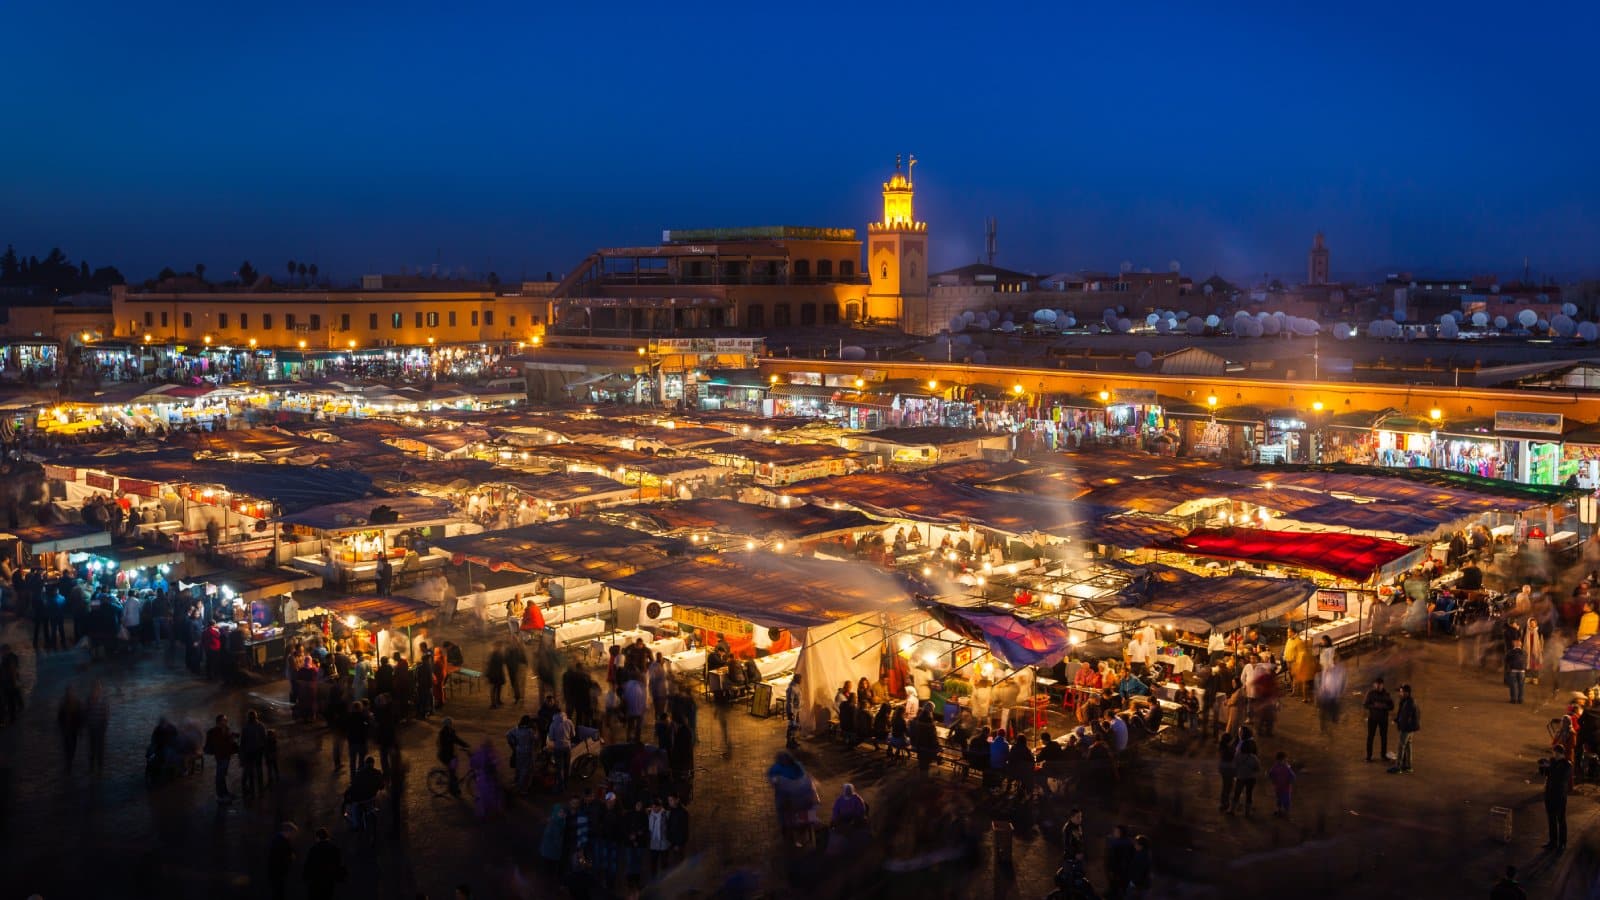 <p class="wp-caption-text">Image Credit: Shutterstock / Maurizio De Mattei</p>  <p><span>Morocco’s sensory overload comes without a hefty price tag. From the chaos of Marrakech’s markets to the quiet of the Sahara, it’s a budget traveler’s dream—just watch out for the snake charmers.</span></p>